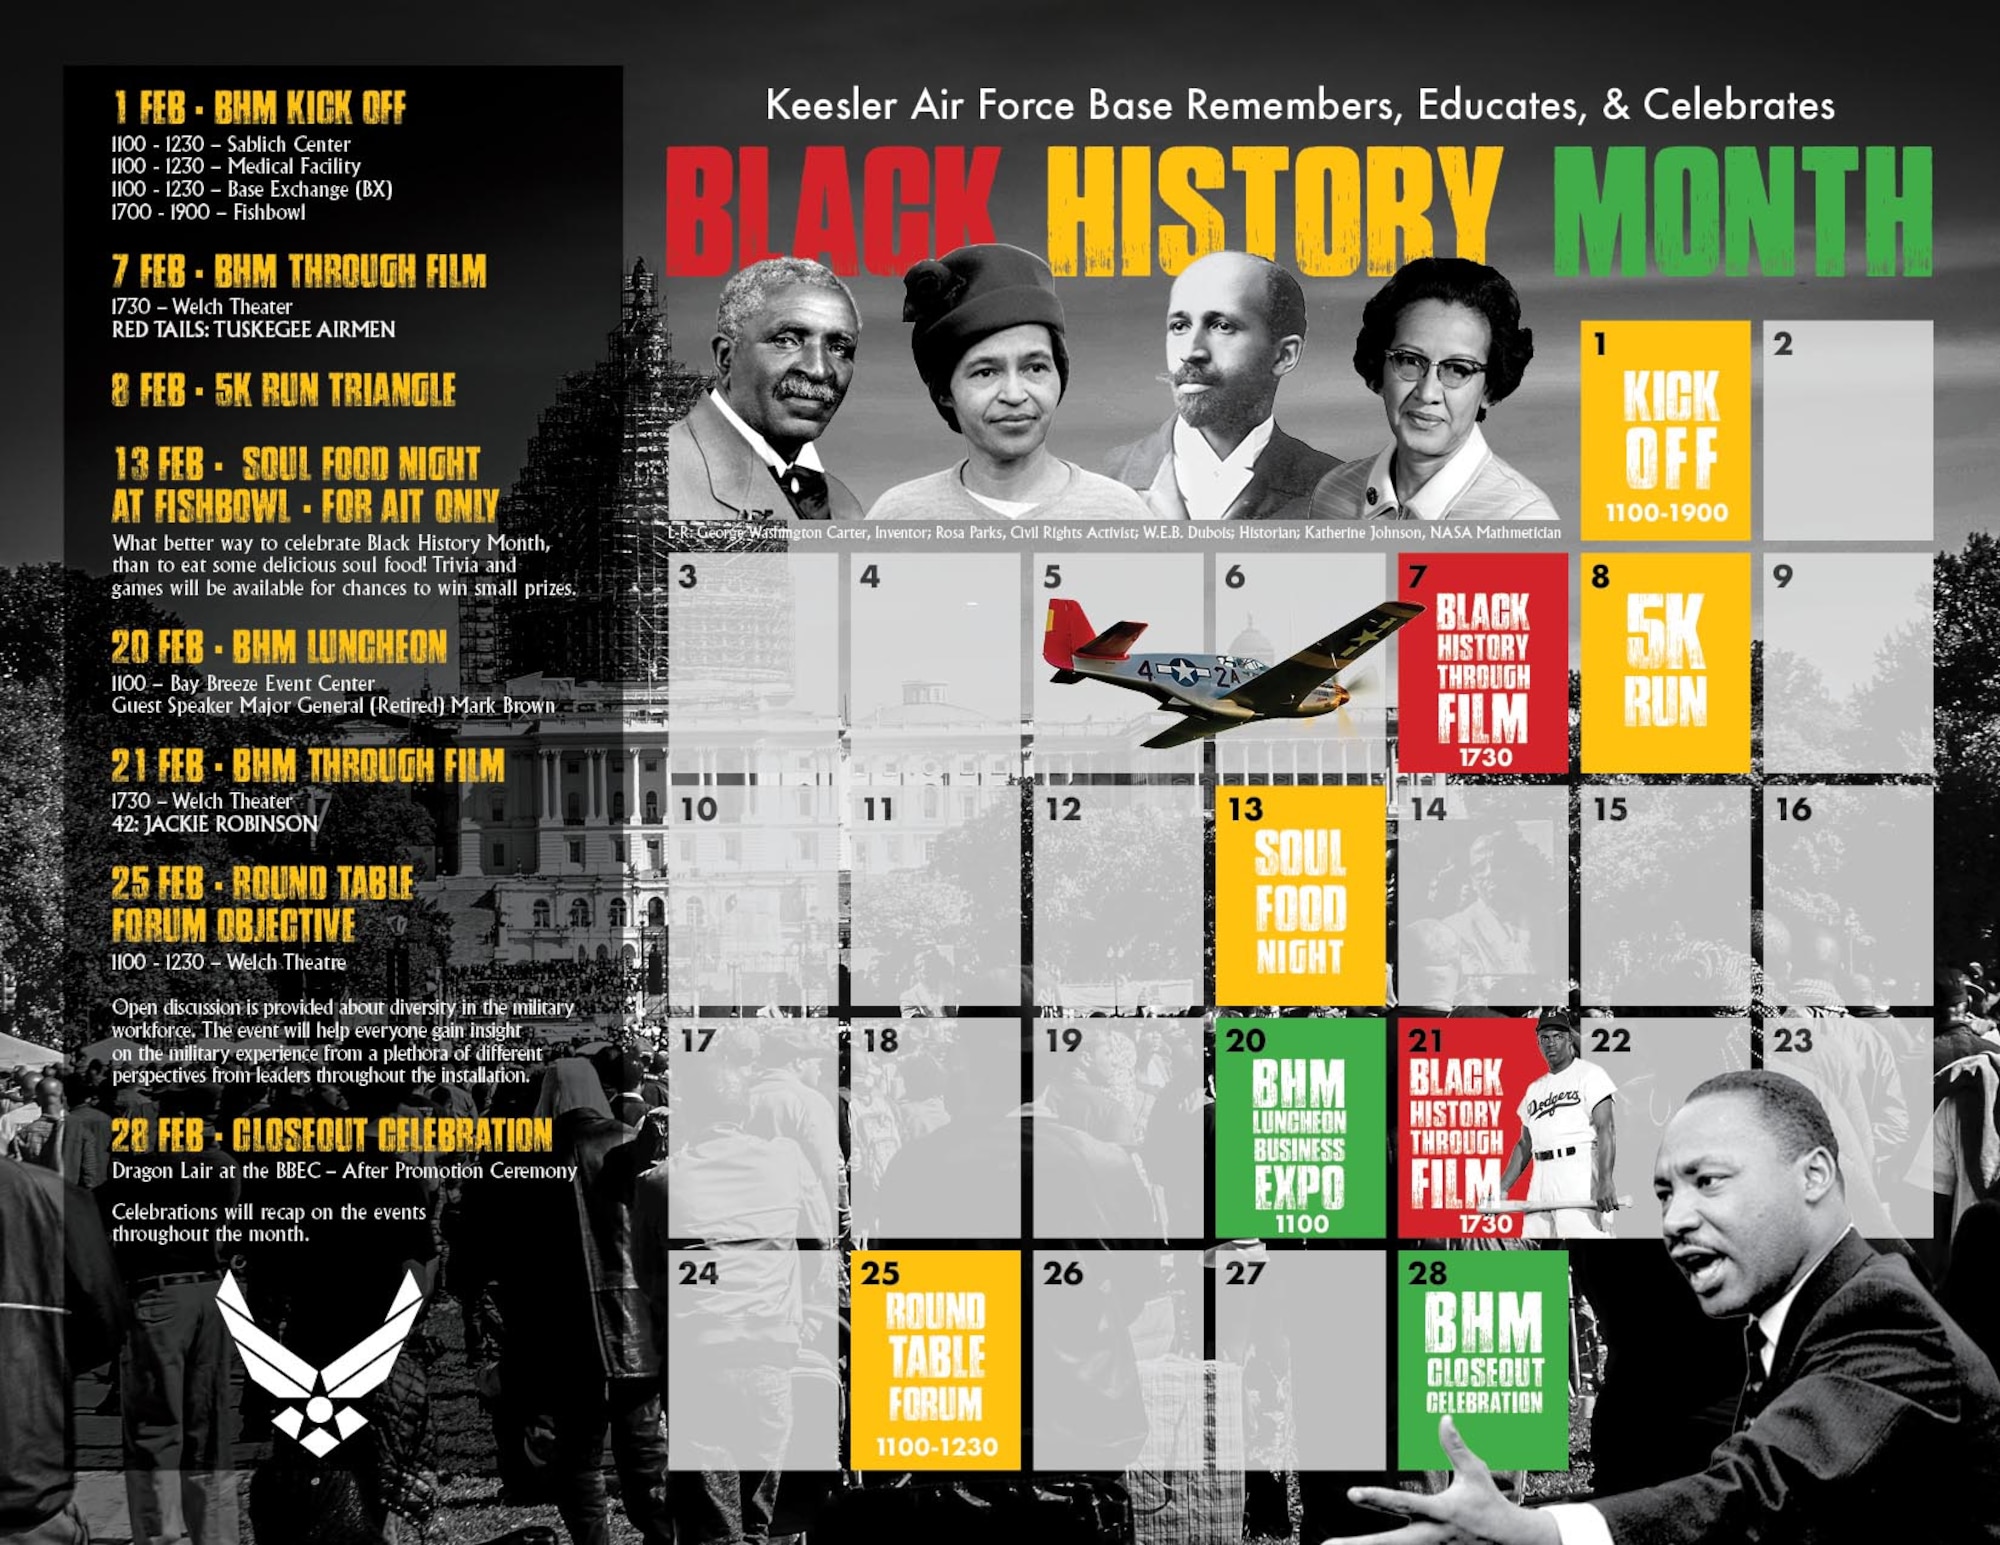 A Black History Month event flyer is displayed at Keesler Air Force Base, Mississippi, Feb. 1, 2019. The Keesler African-American Heritage Committee will host several events to include a 5K run, luncheon, movies and a round table forum. The events are meant to help Keesler personnel to remember, educate and celebrate black history.